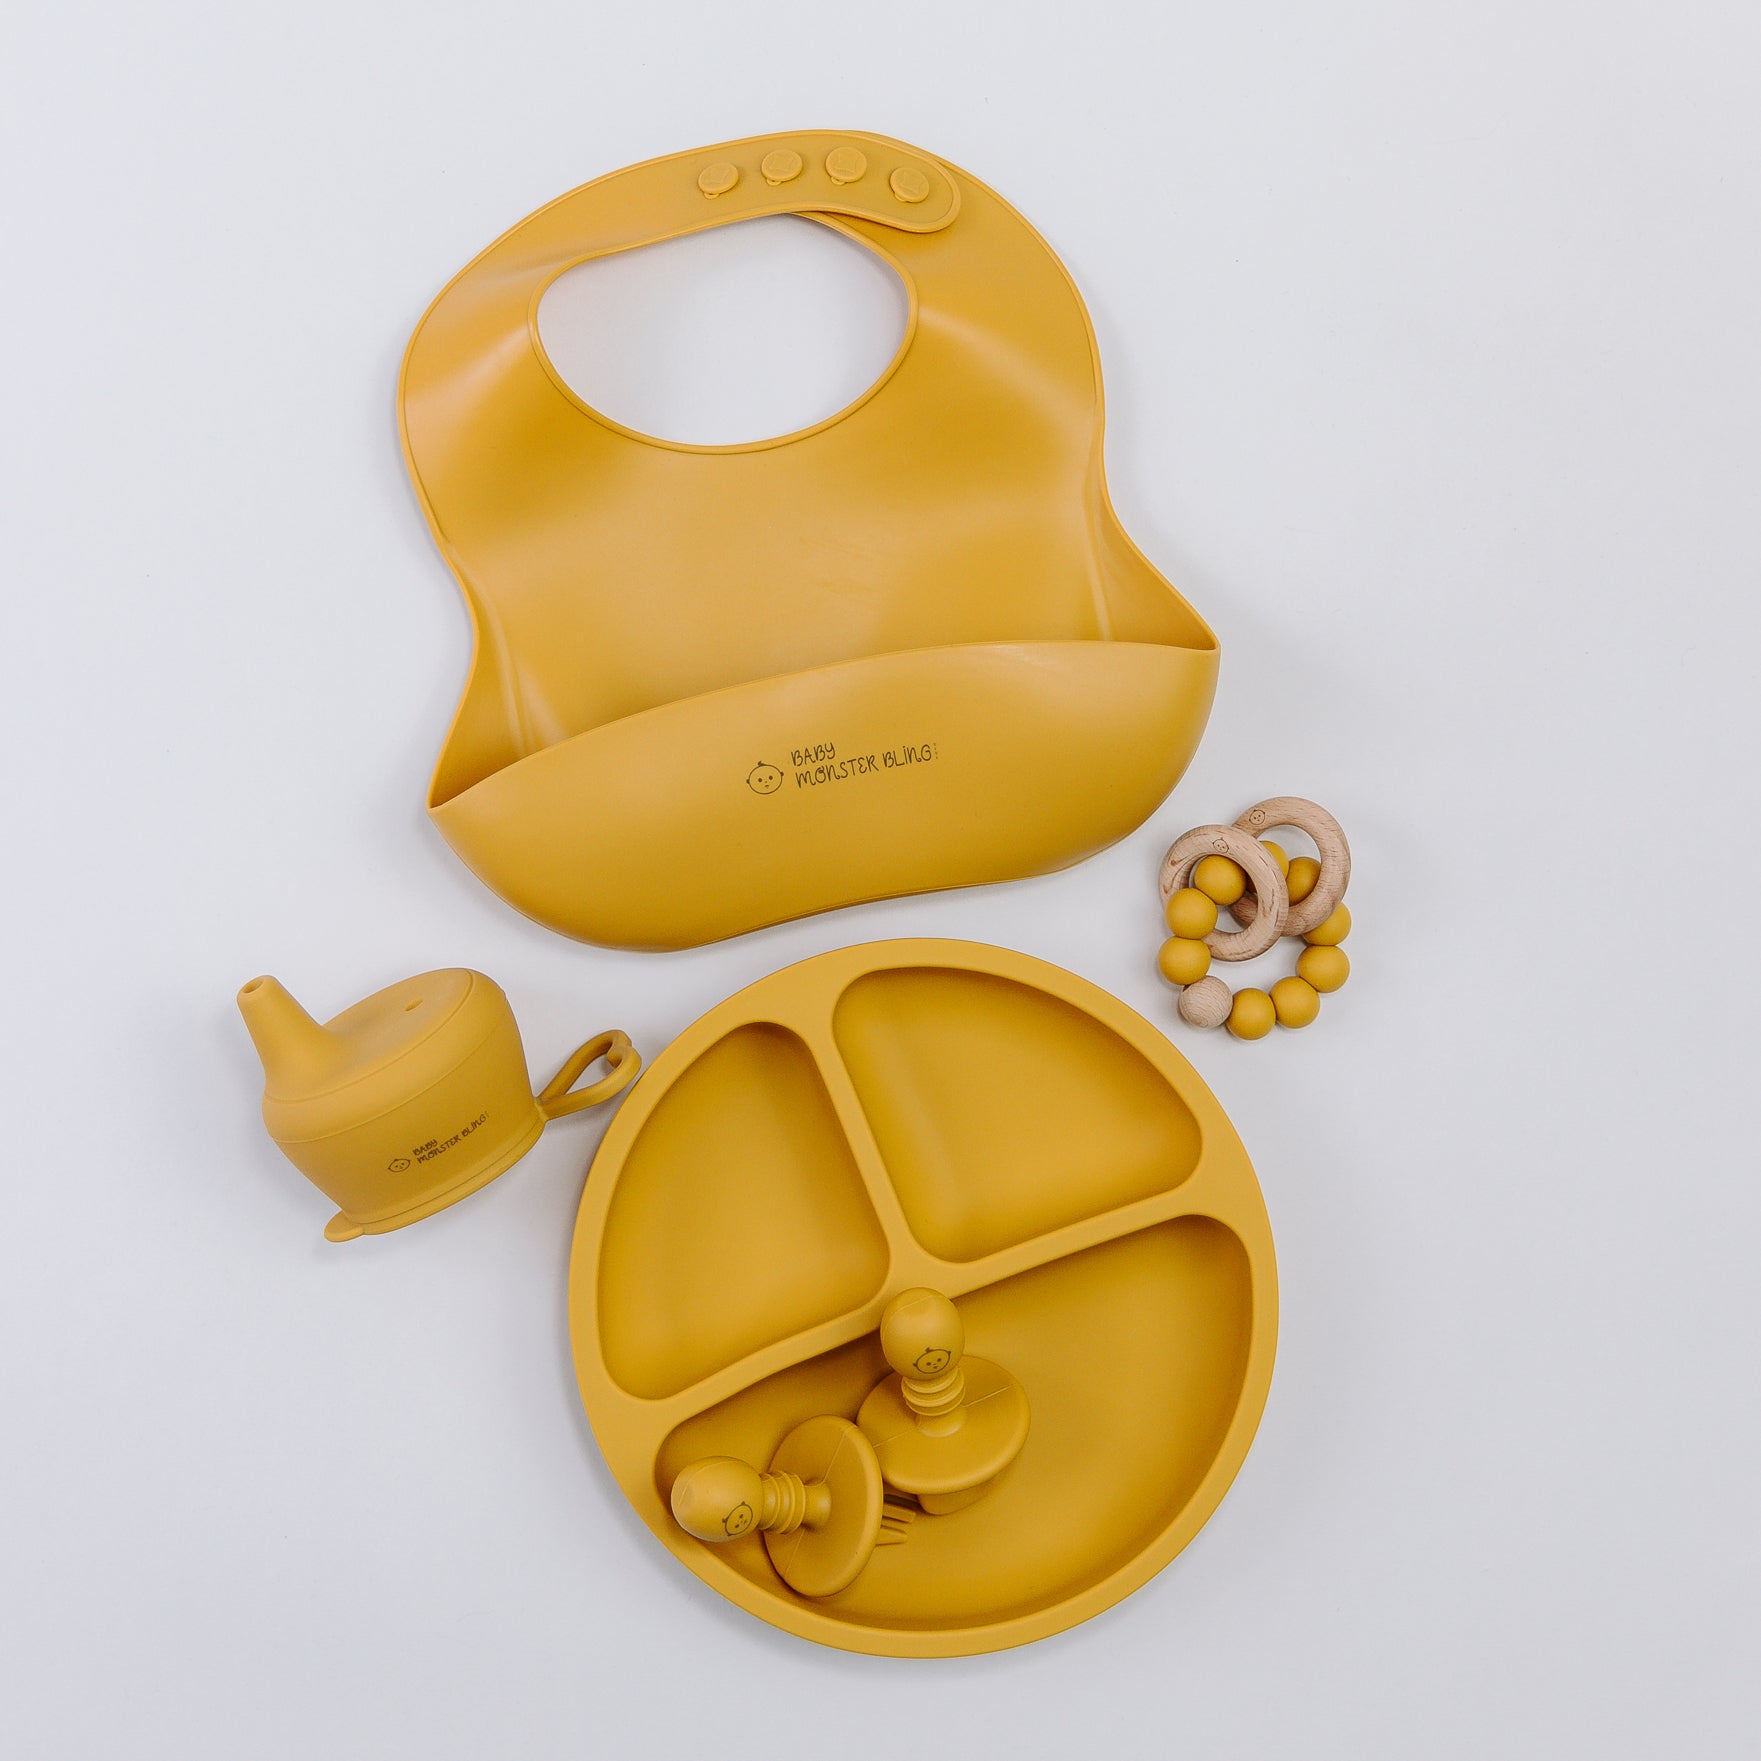 Meal set including bib, plate, utensils, silicone lids, teething rattle